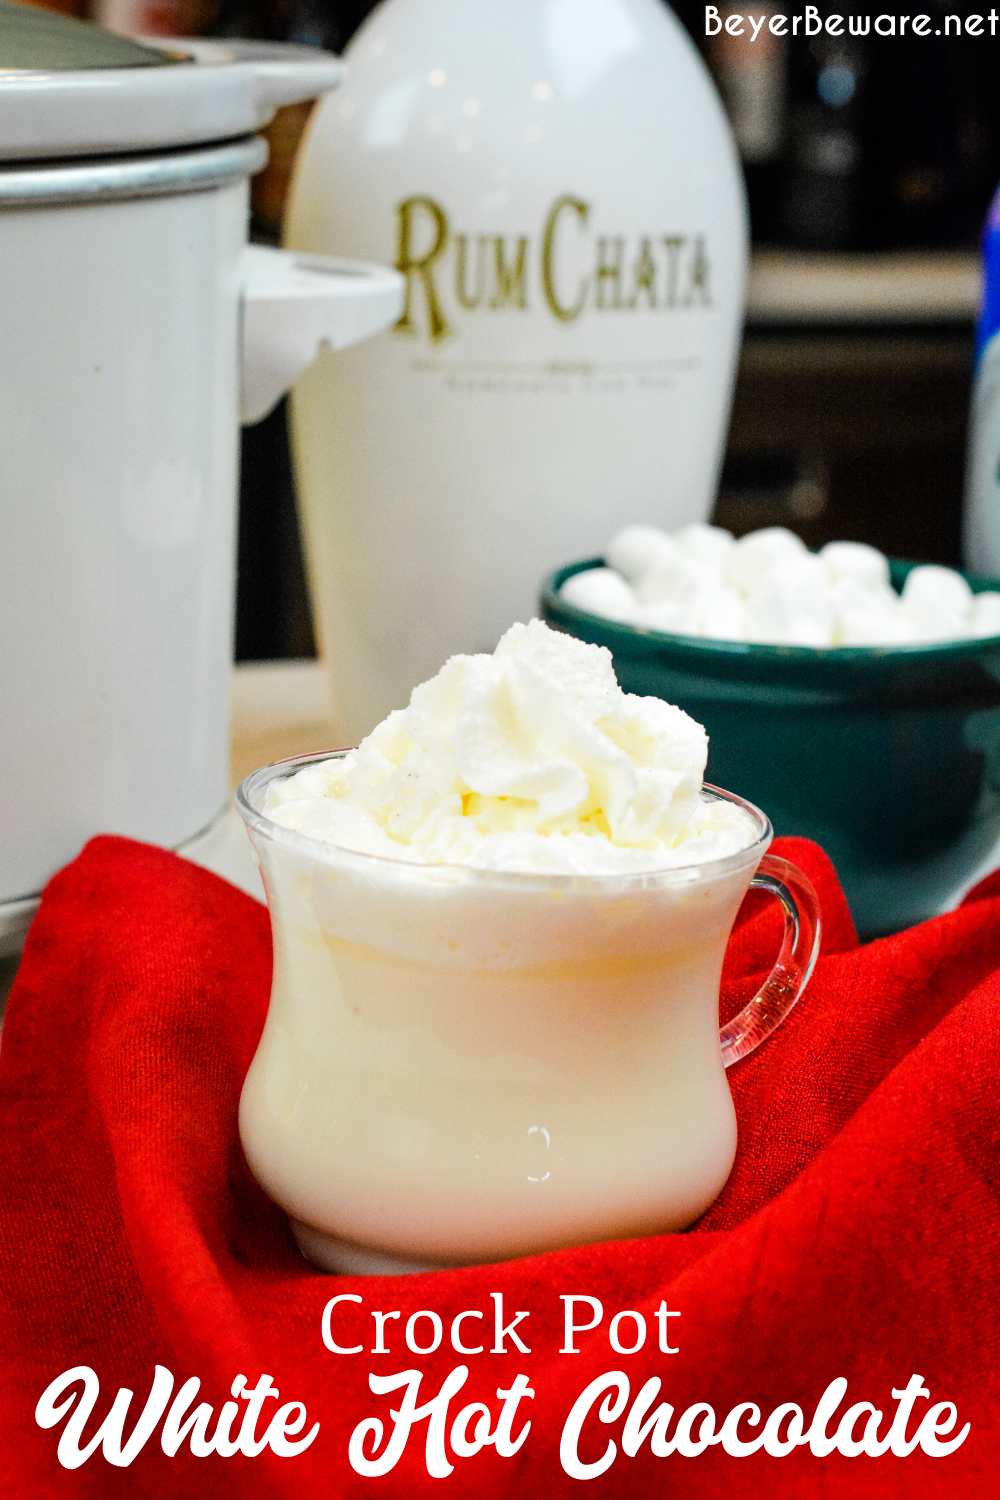 https://www.farmwifedrinks.com/wp-content/uploads/2015/12/Crock-Pot-White-Hot-Chocolate.png